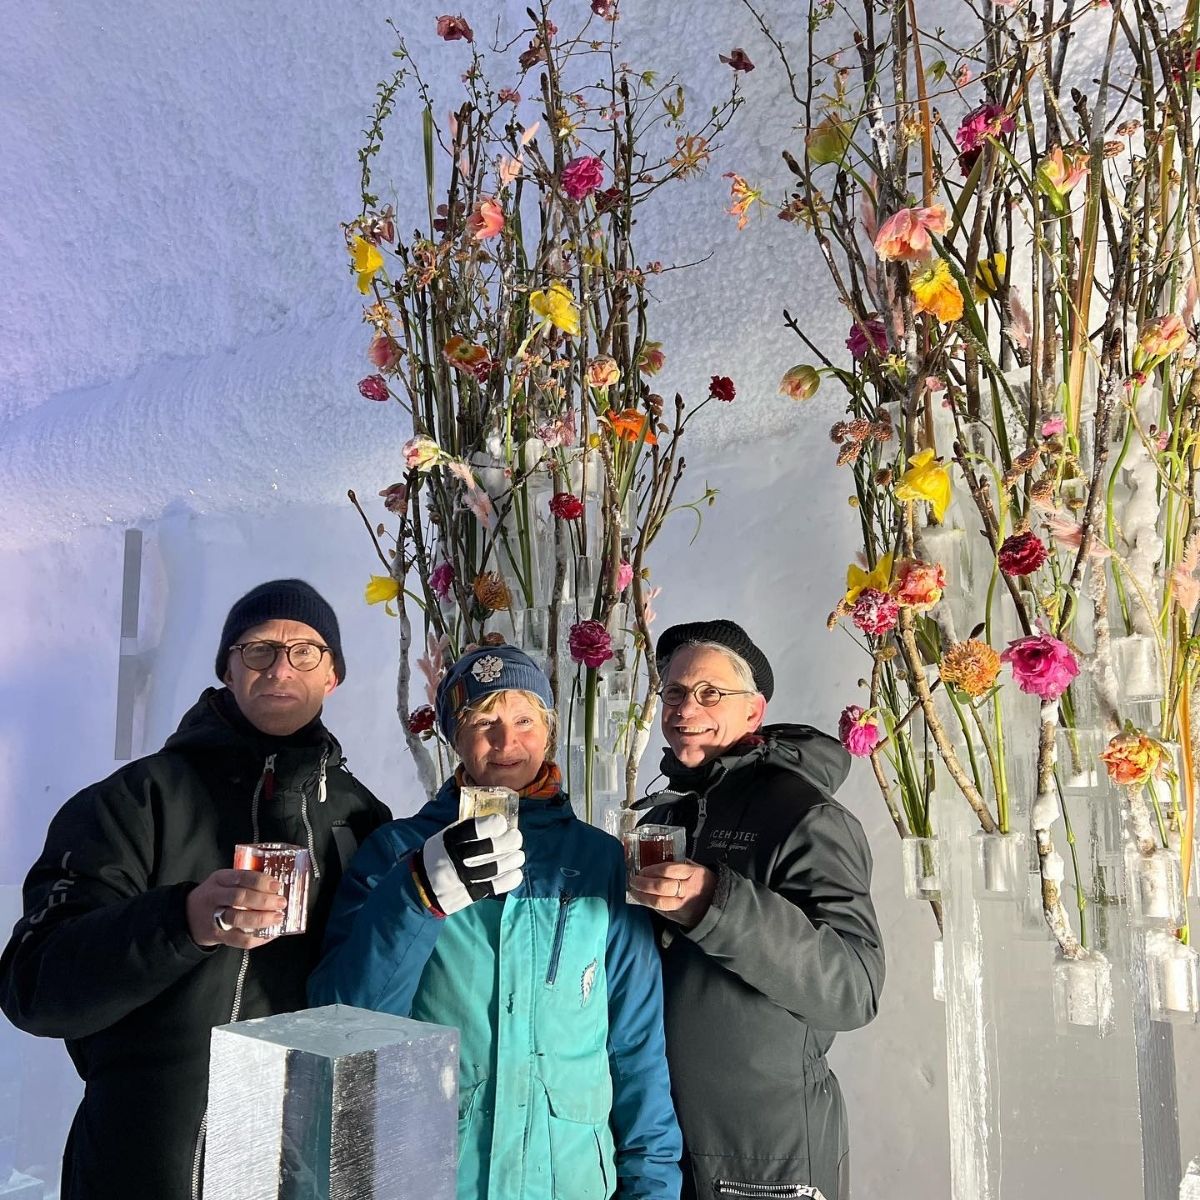 A Unique Workshop at Icehotel Sweden With Flowers and Ice Resulting in Exceptional Designs and Wonderful Friendships - On Thursd